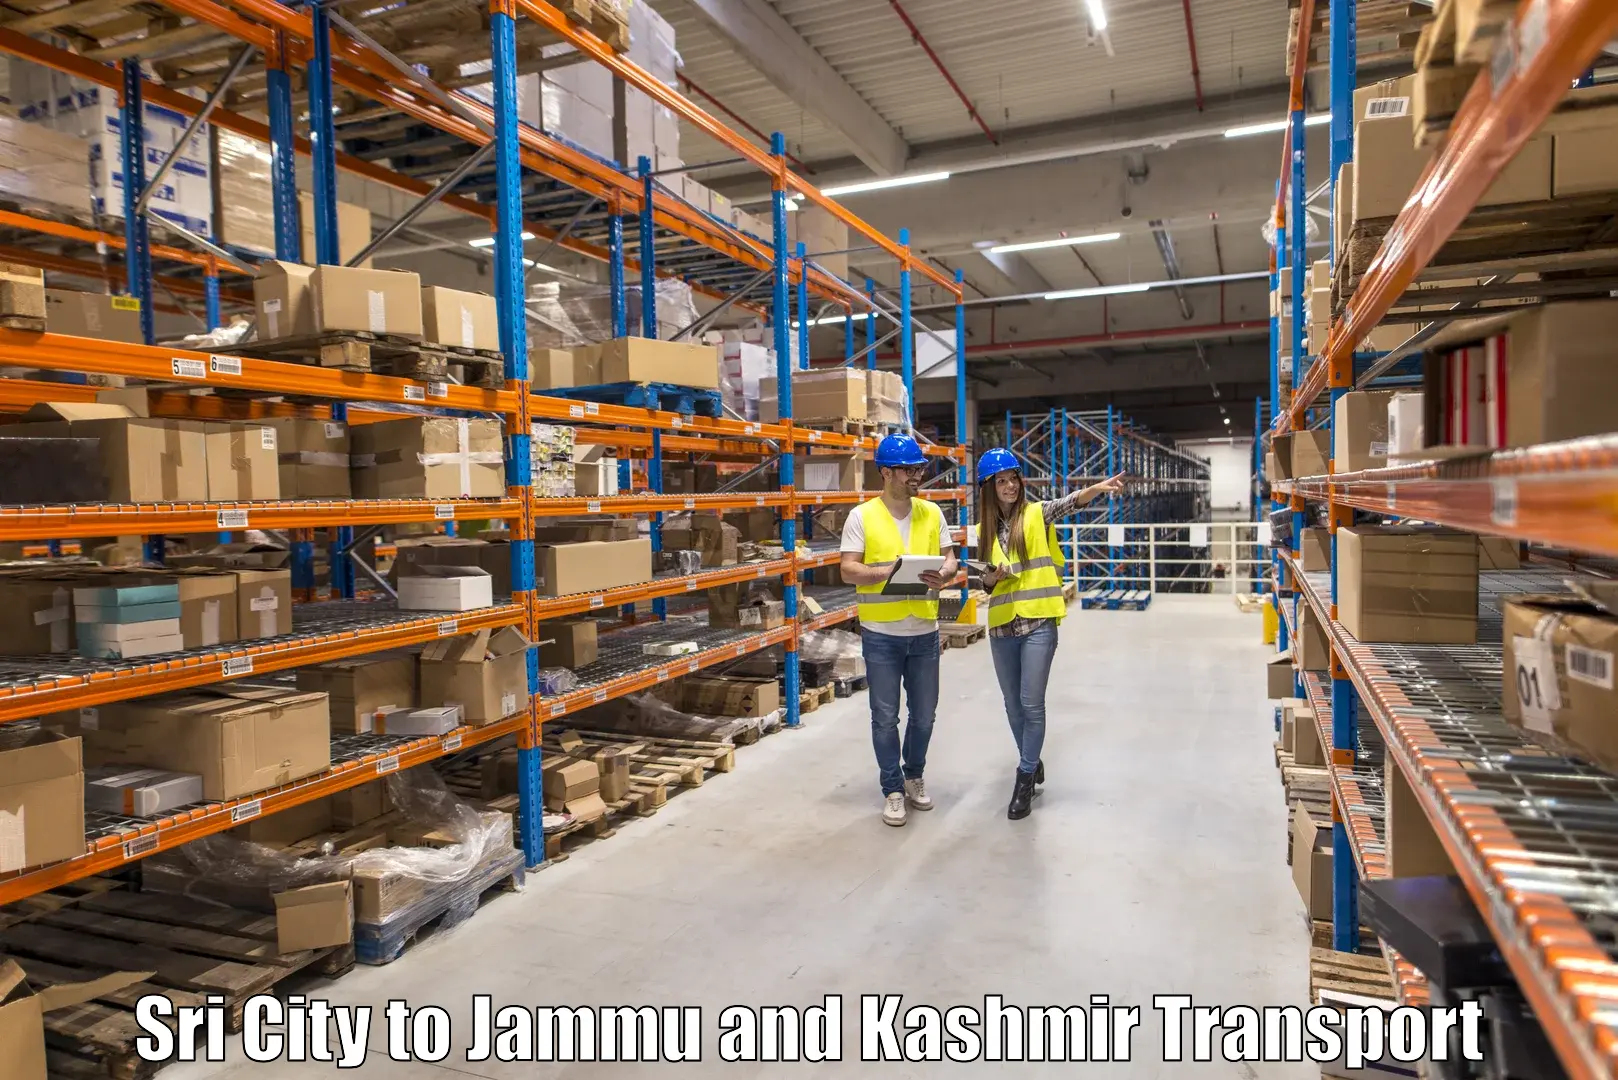 Air freight transport services Sri City to University of Jammu